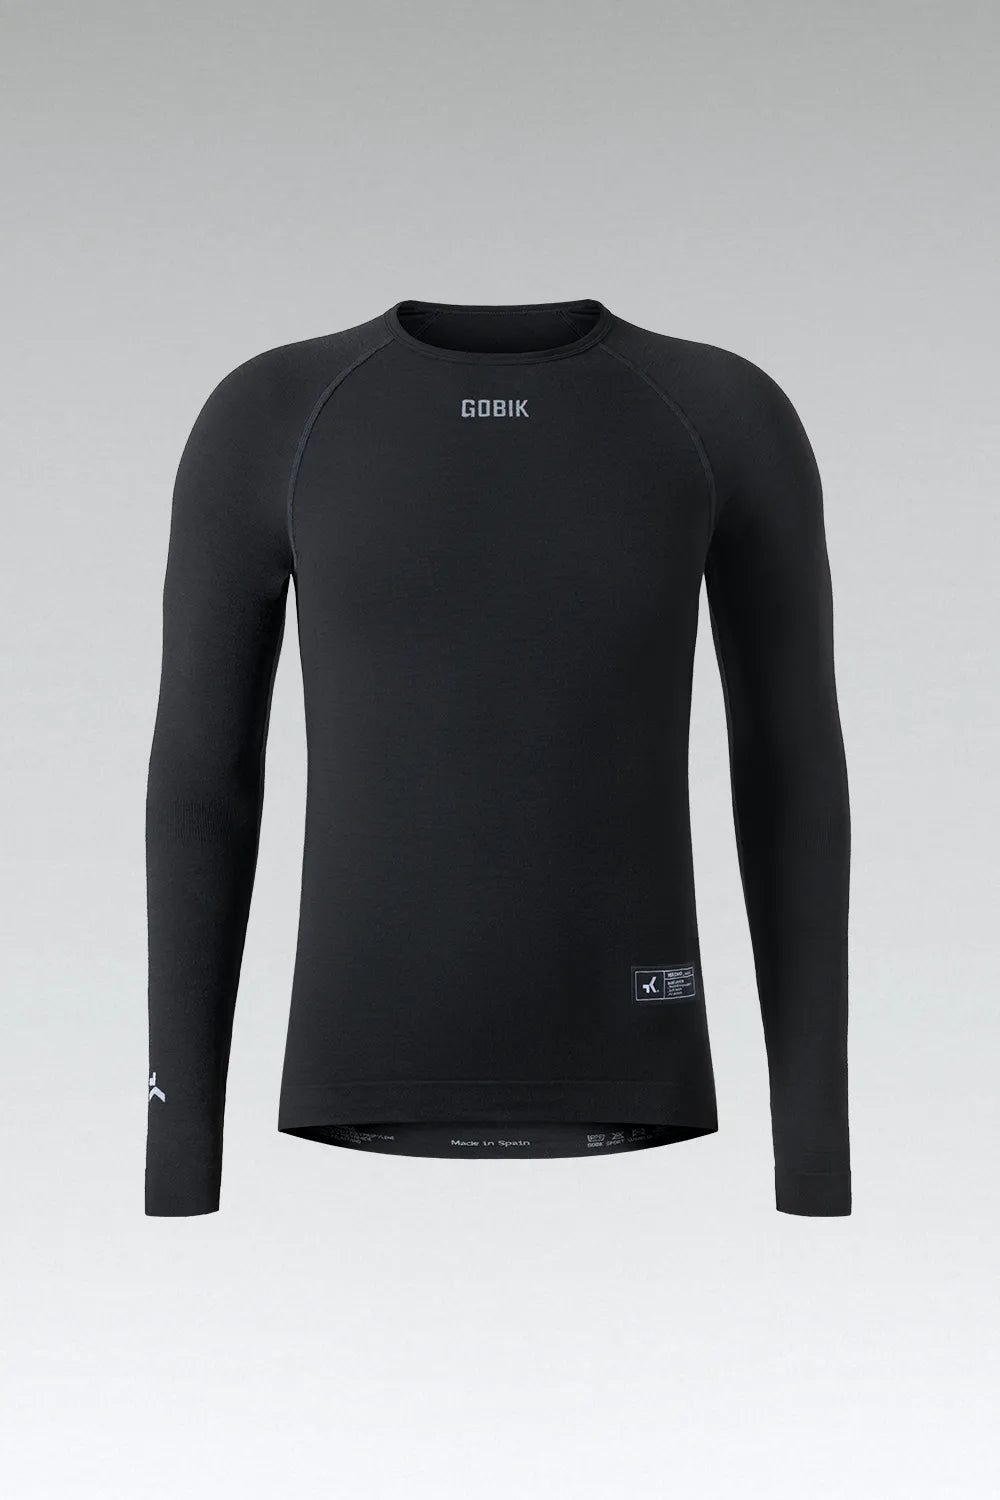 SOUS MAILLOT MANCHES LONGUES WINTER MERINO HOMME COAL